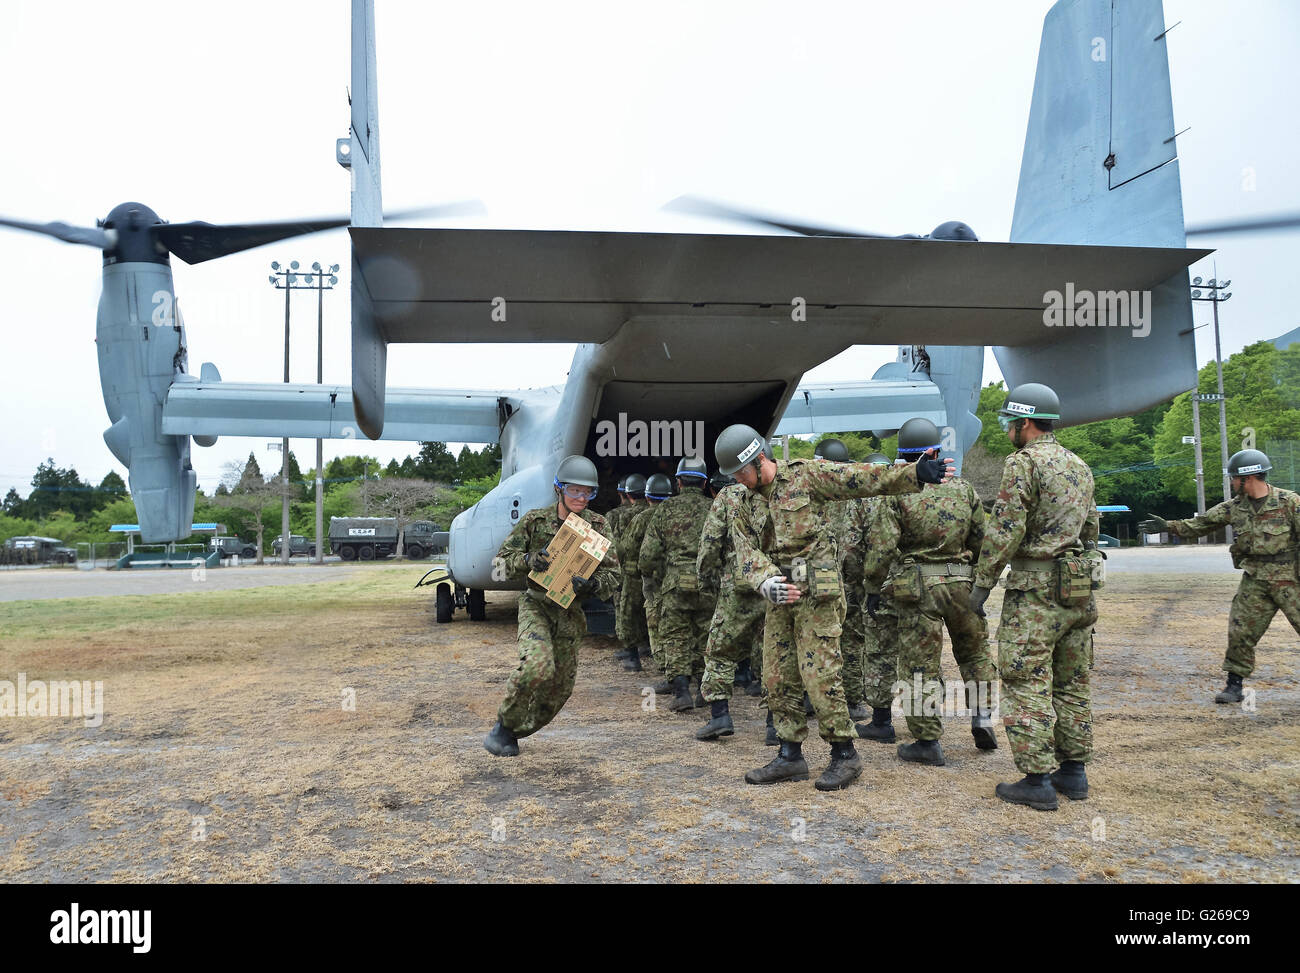 Member of Japan's Ground Self-Defense Force unload aid supplies from U.S. Marines' MV-22 Osprey in Kumamoto prefecture, on April 23, 2016. © AFLO/Alamy Live News Stock Photo